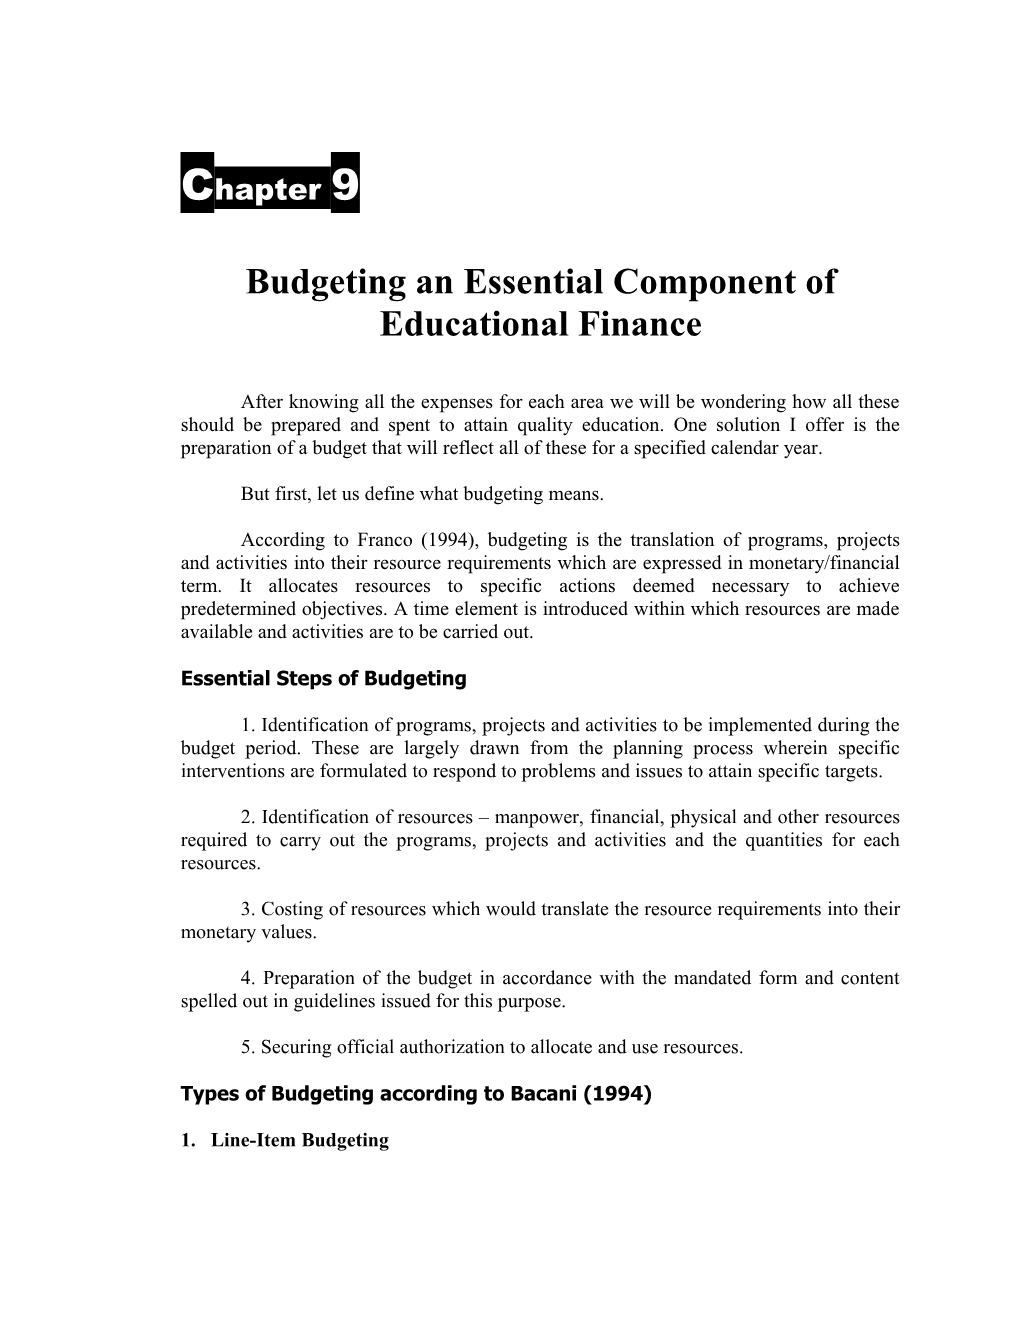 Budgeting an Essential Component of Educational Finance